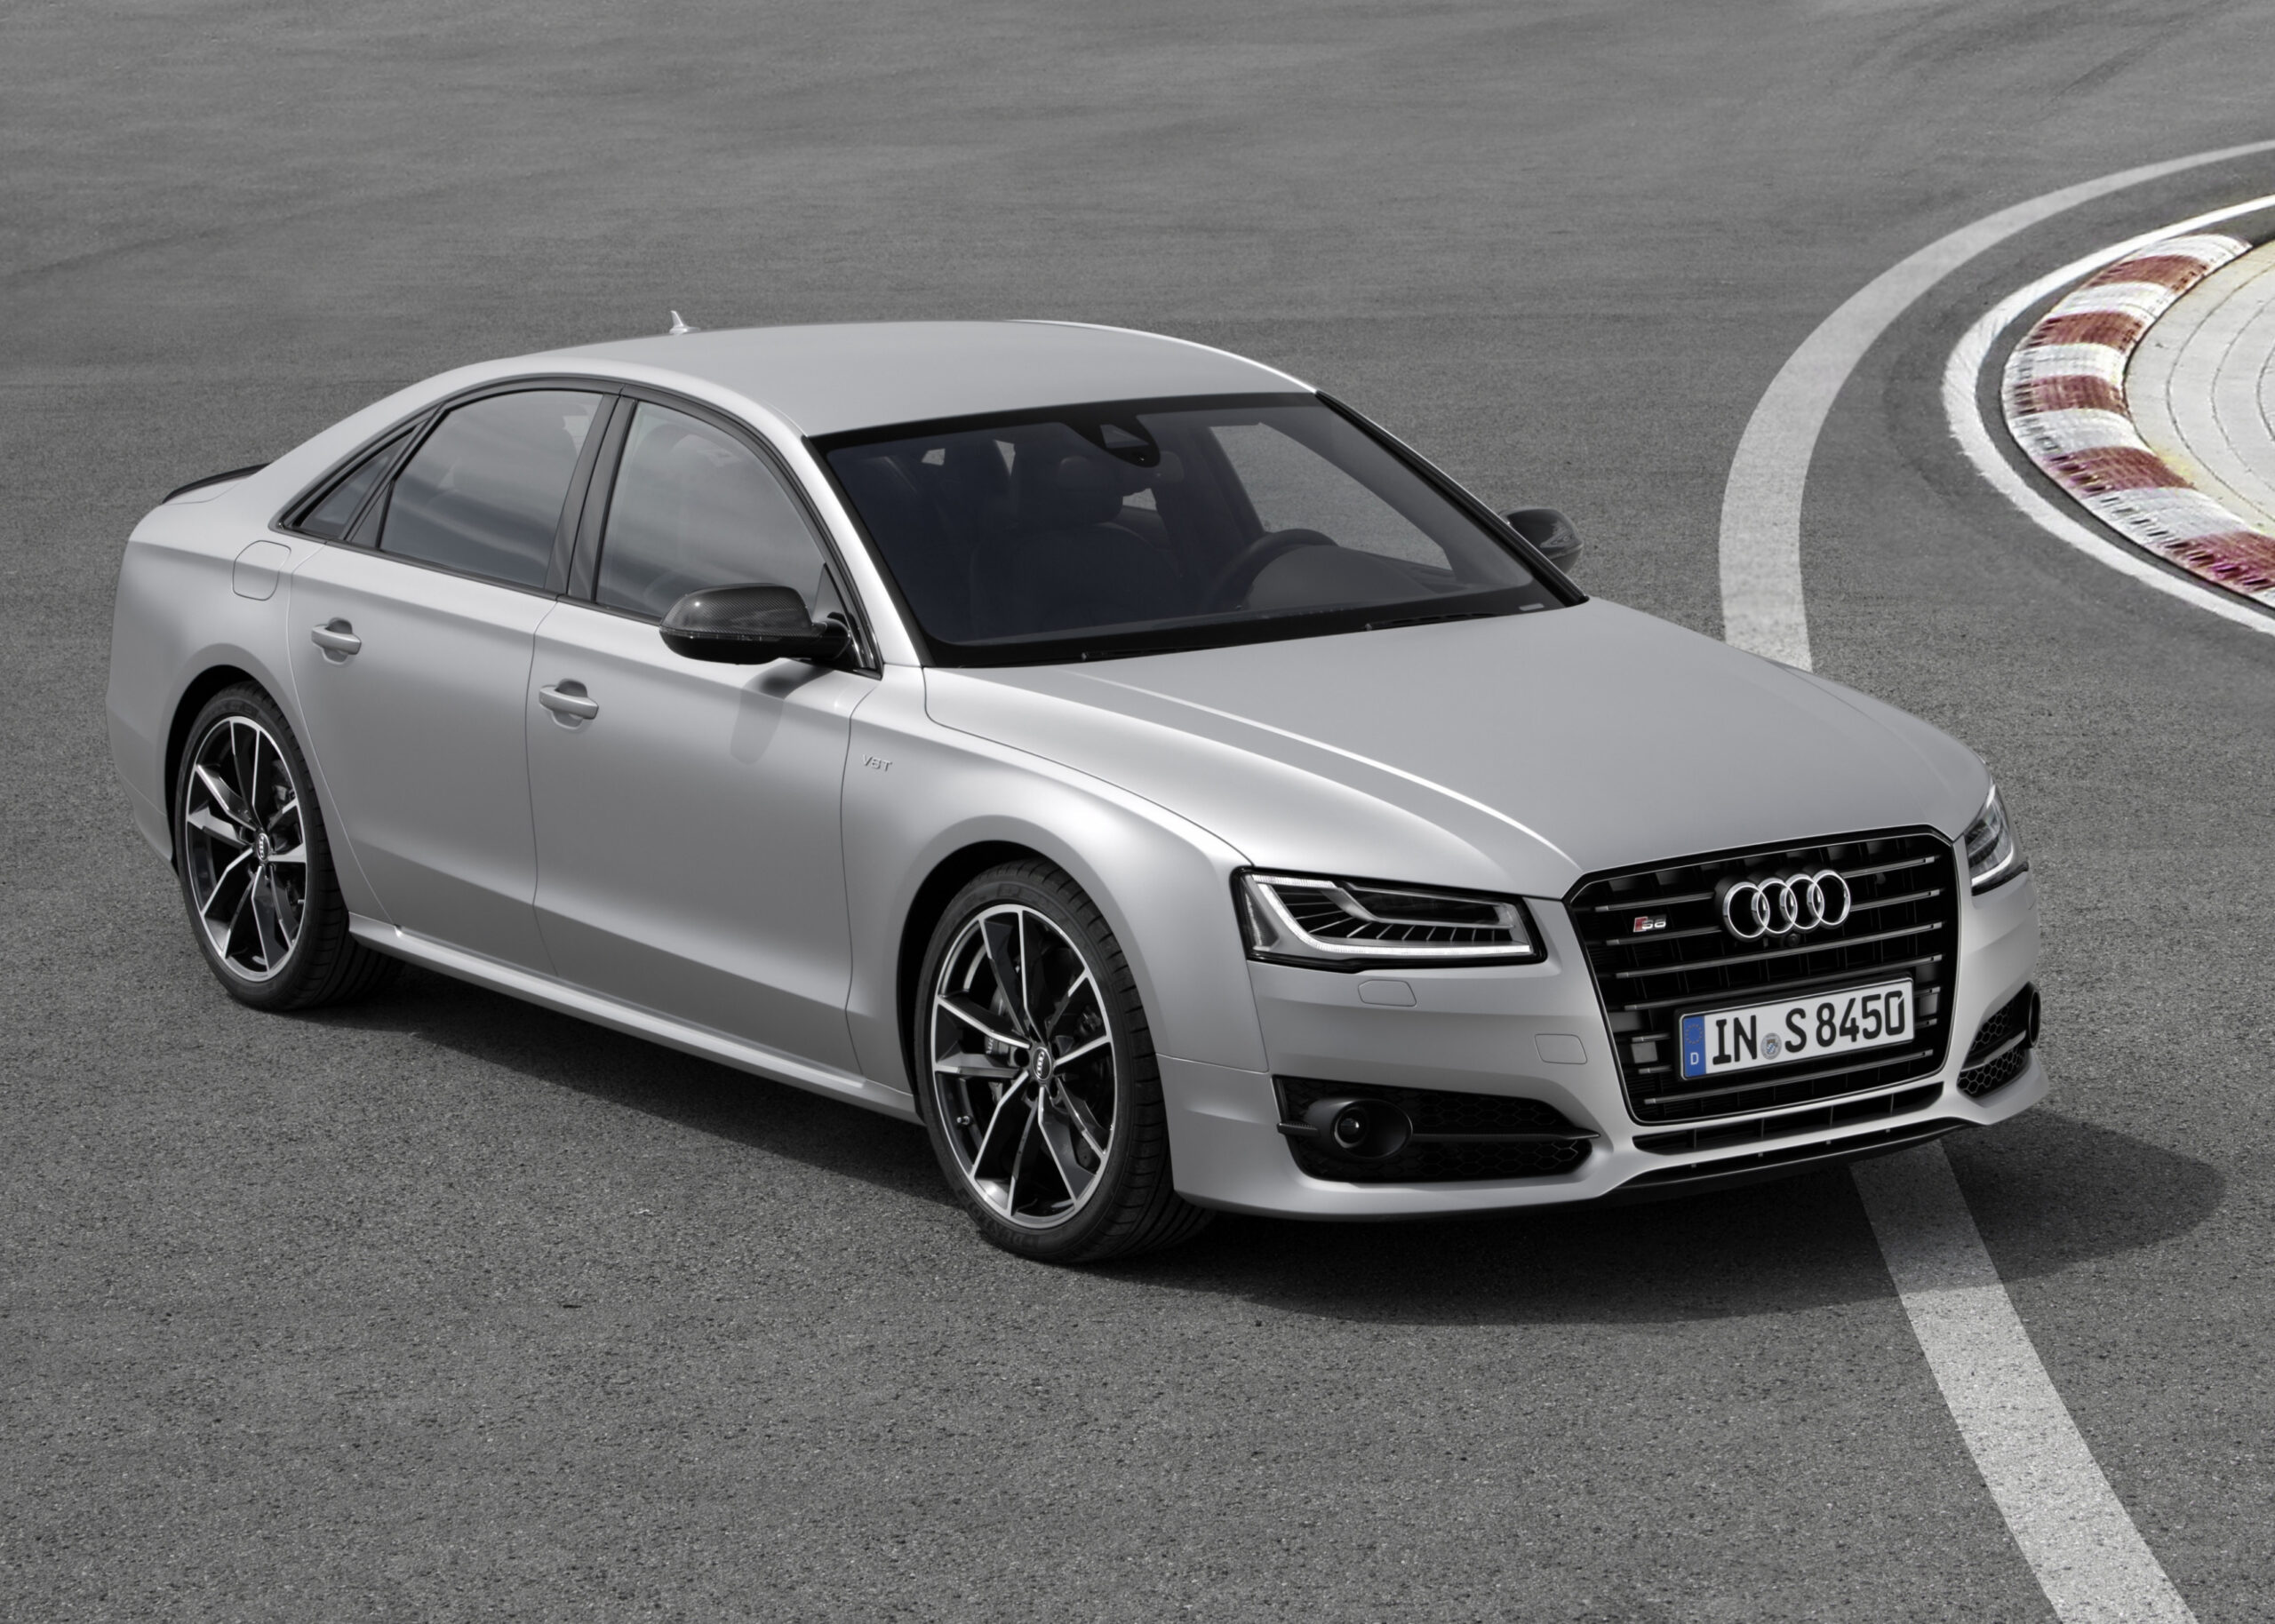 Audi S5 Plus Romps With the World